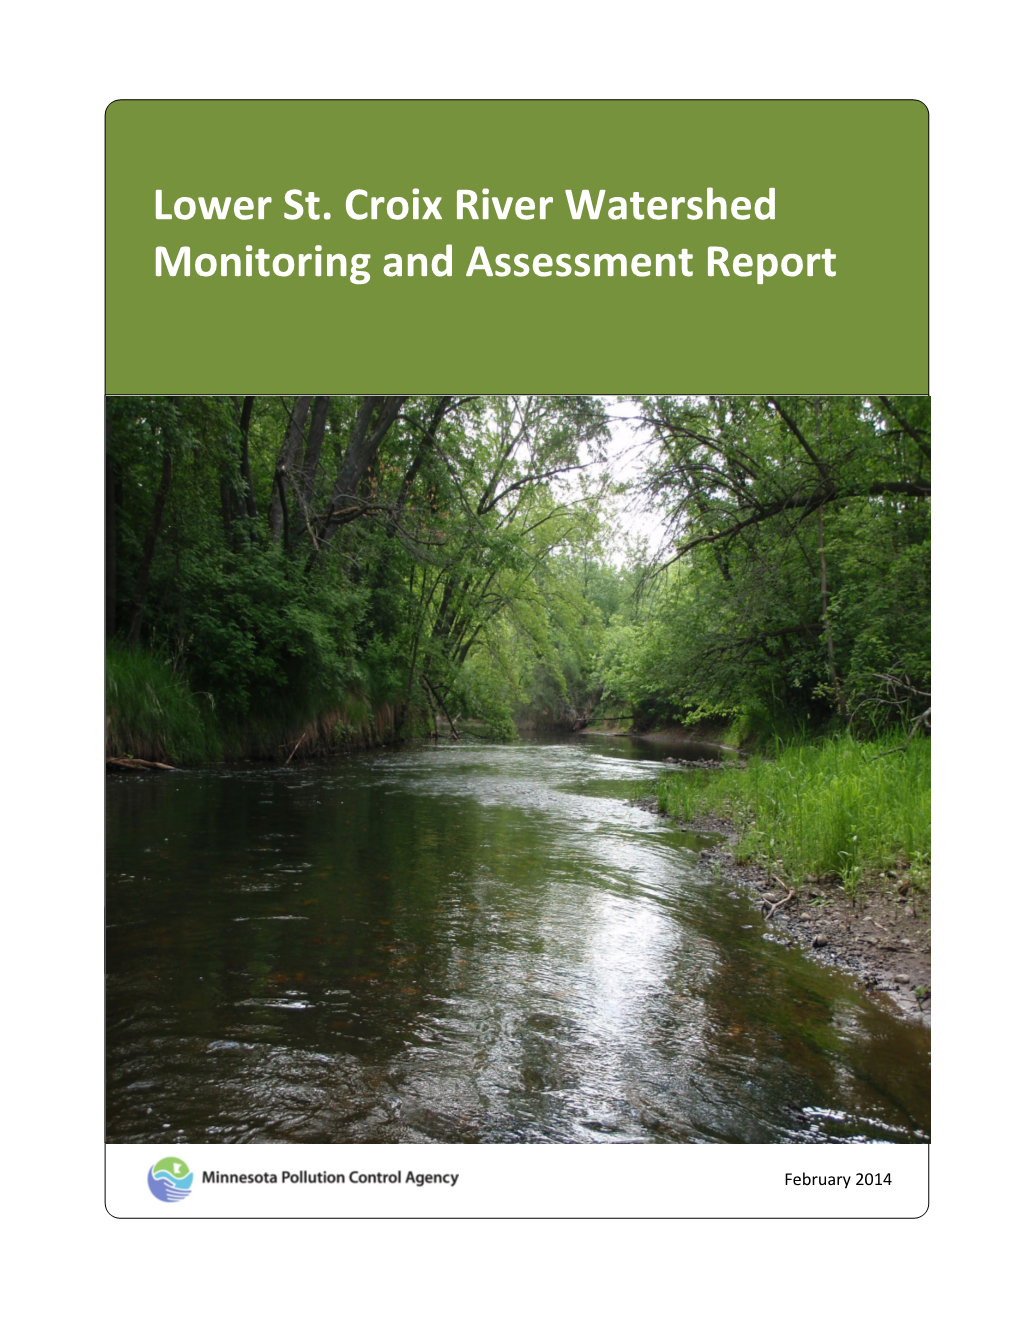 Lower St. Croix River Watershed Monitoring and Assessment Report